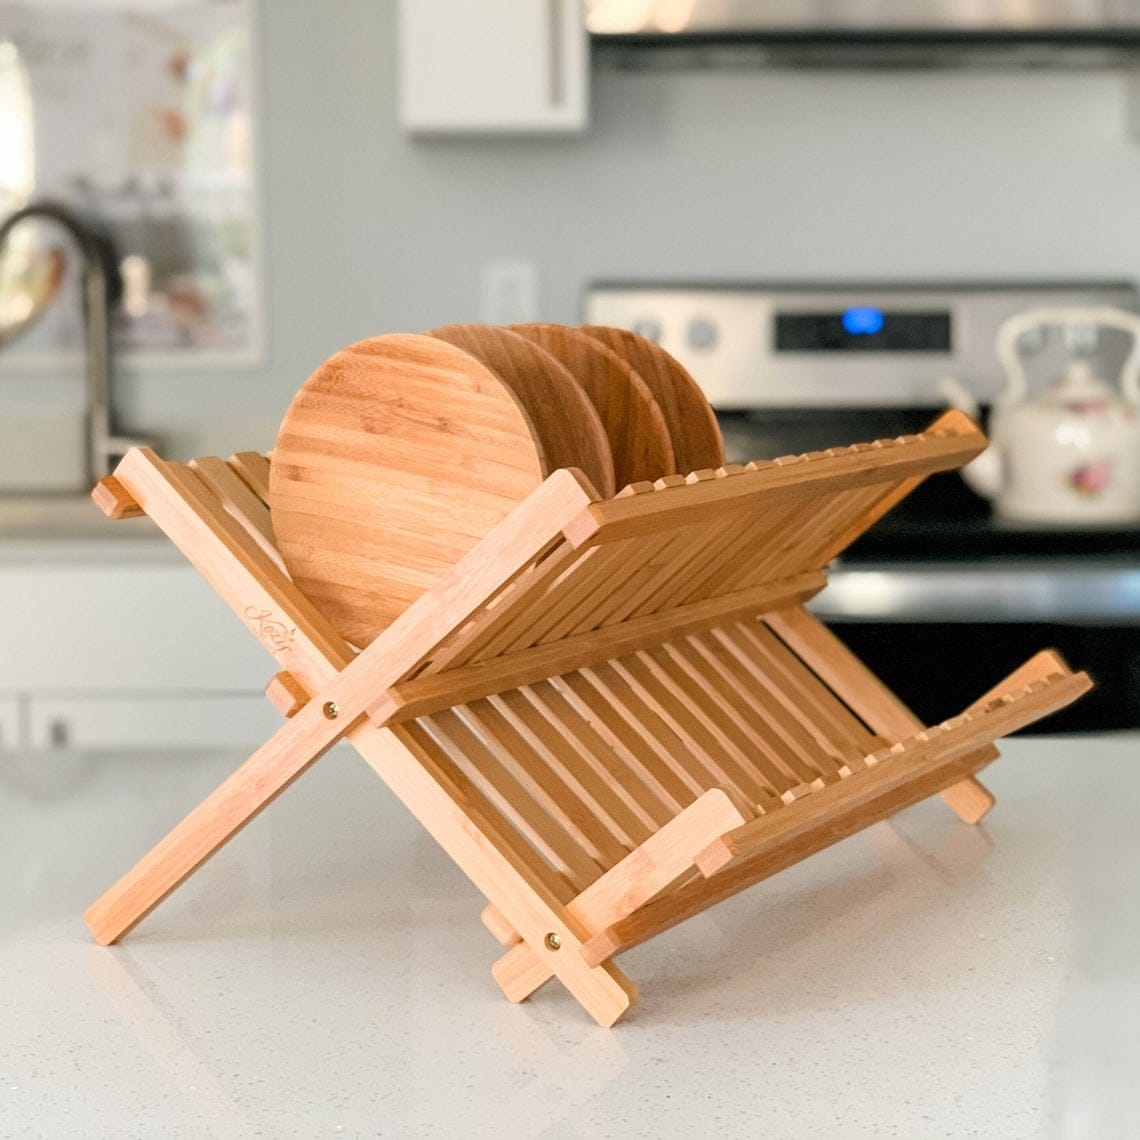 https://ak1.ostkcdn.com/images/products/is/images/direct/2c5d065cb066cf05ca9347f29675680d6896a604/Dish-Drying-Rack-Bamboo-Dish-Rack-plate-rack-Collapsible-Dish-Drainer.jpg